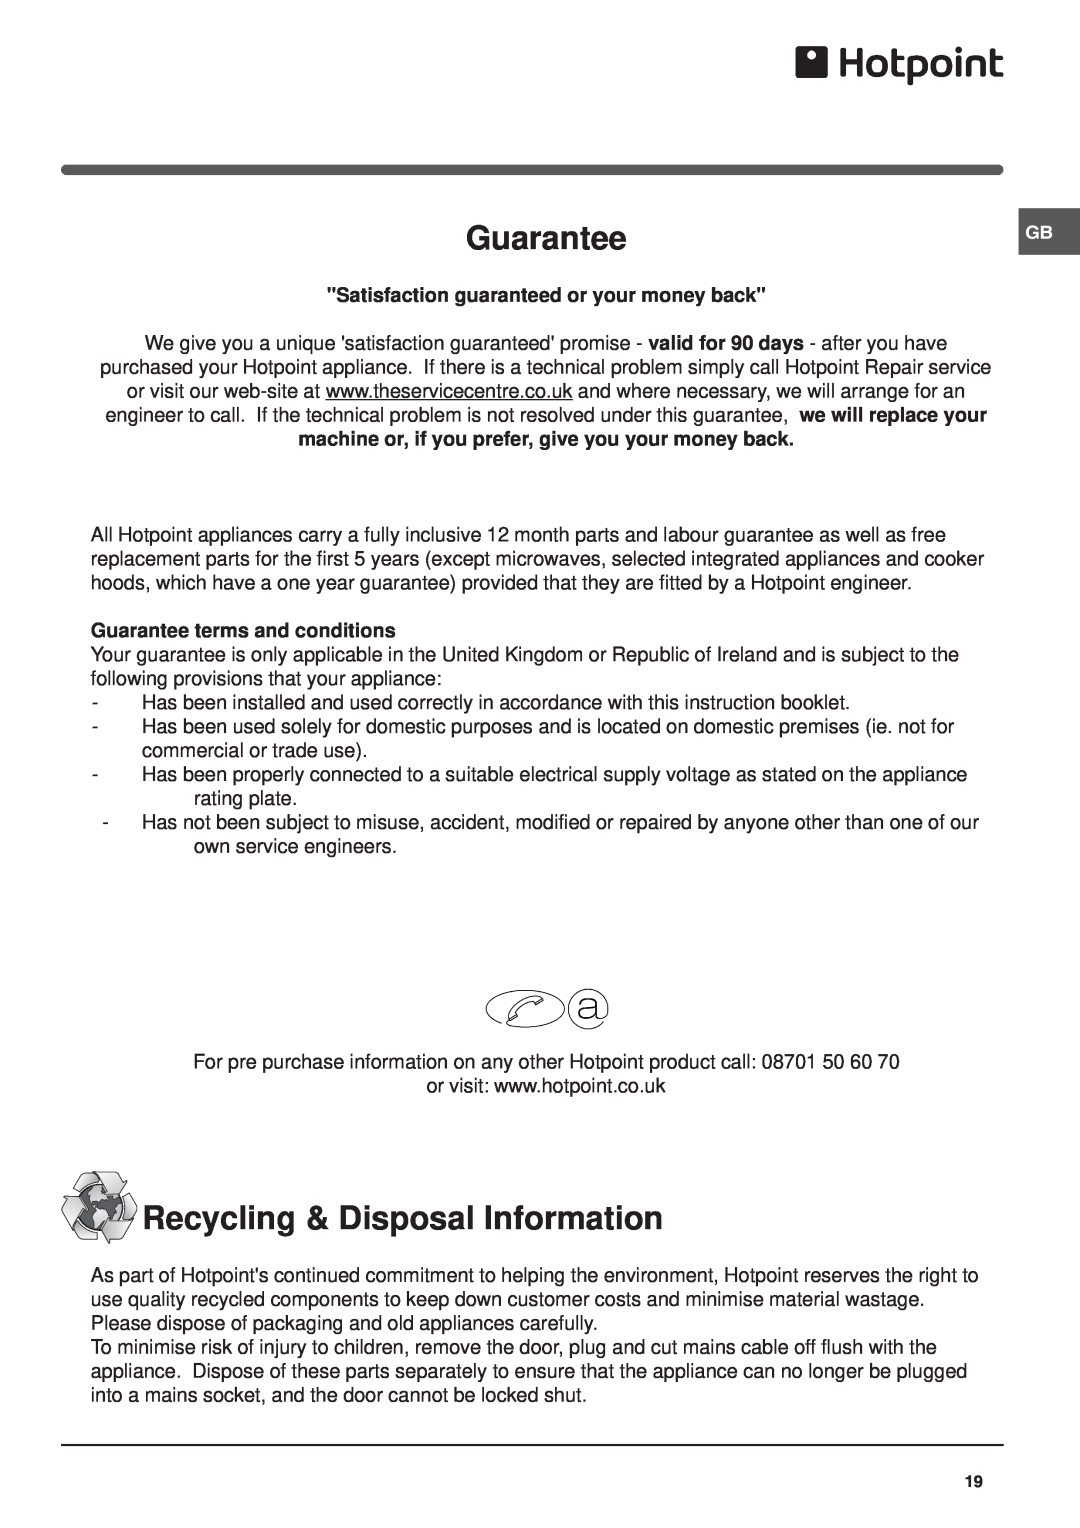 Hotpoint HME35 manual Guarantee, Recycling & Disposal Information, Satisfaction guaranteed or your money back 